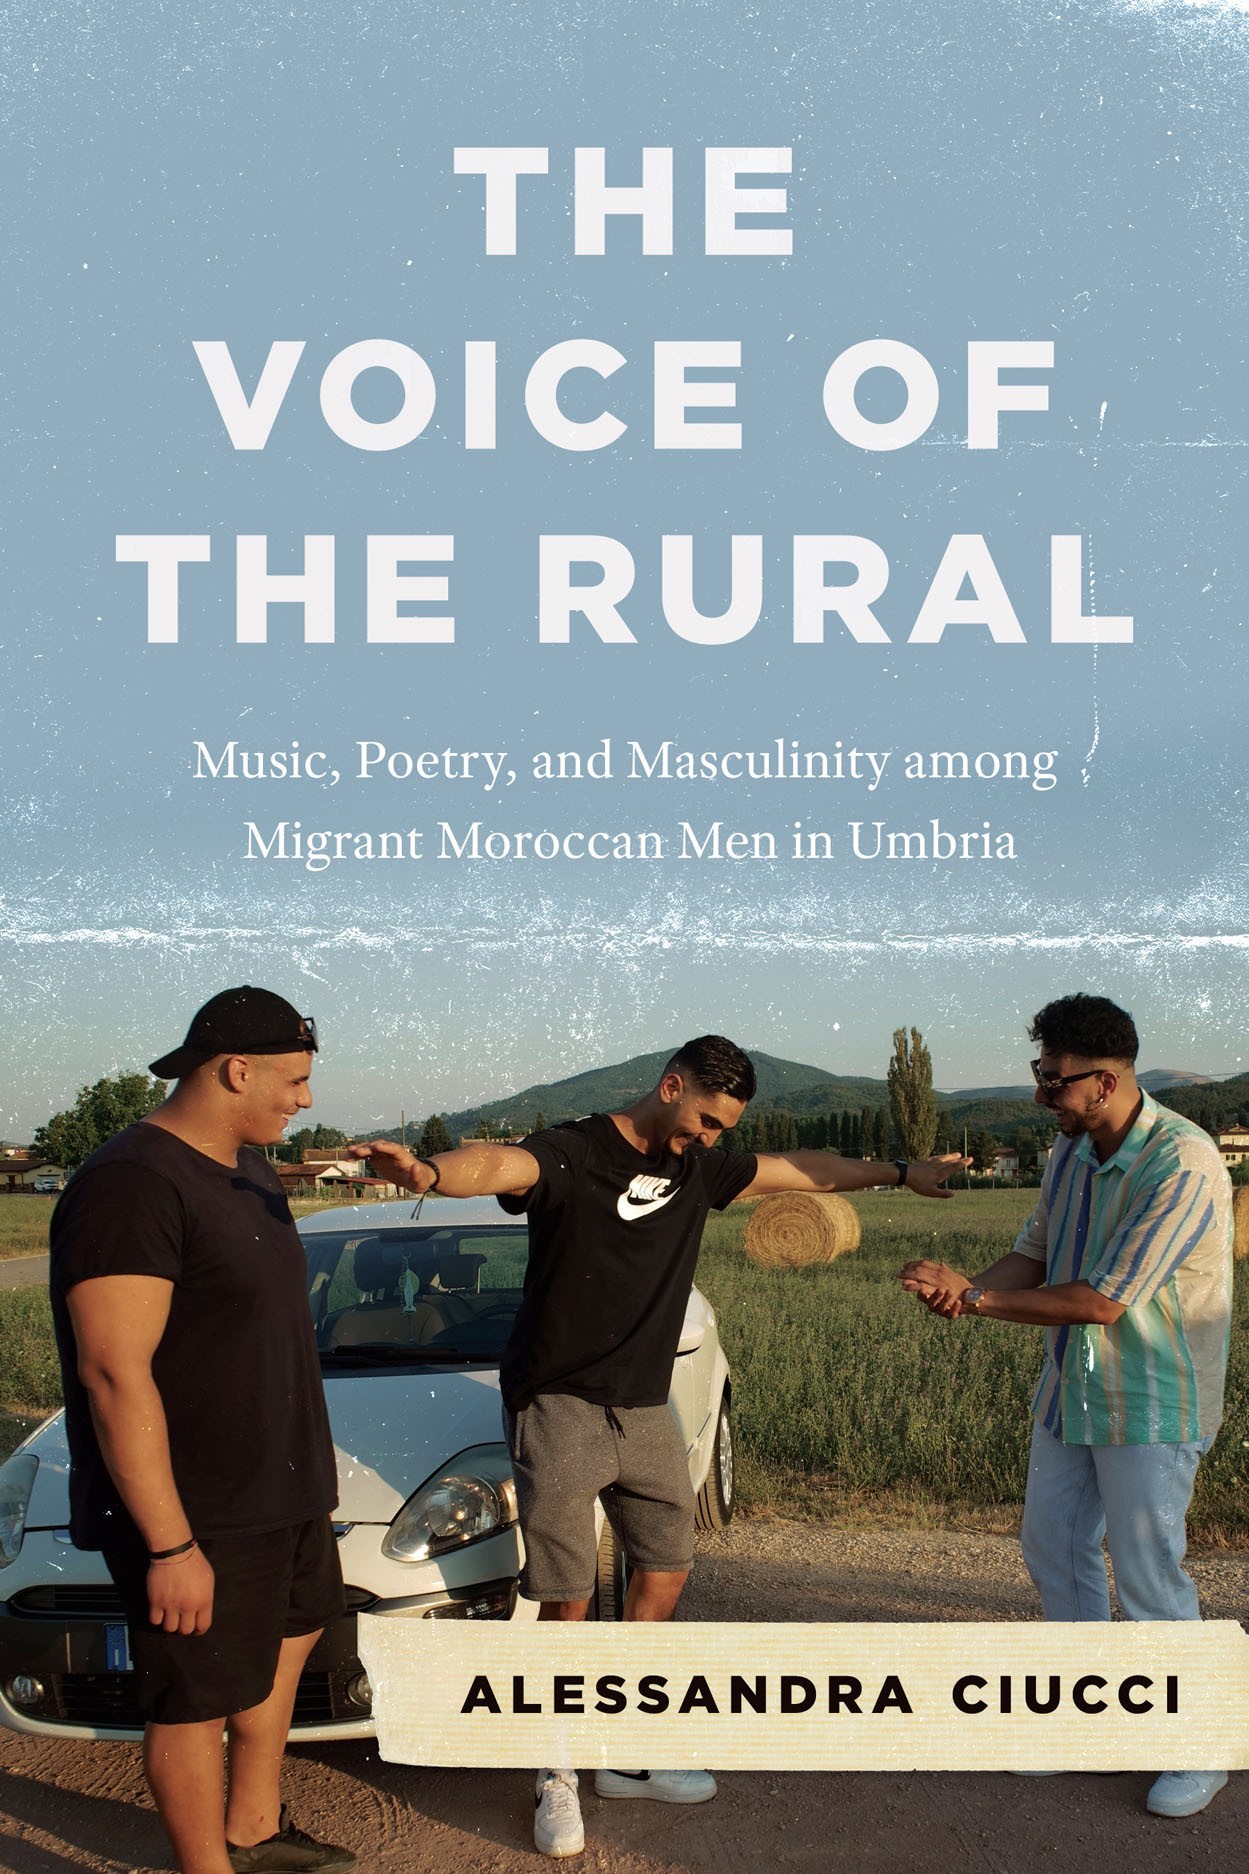 Picture of the voice of the rural book cover